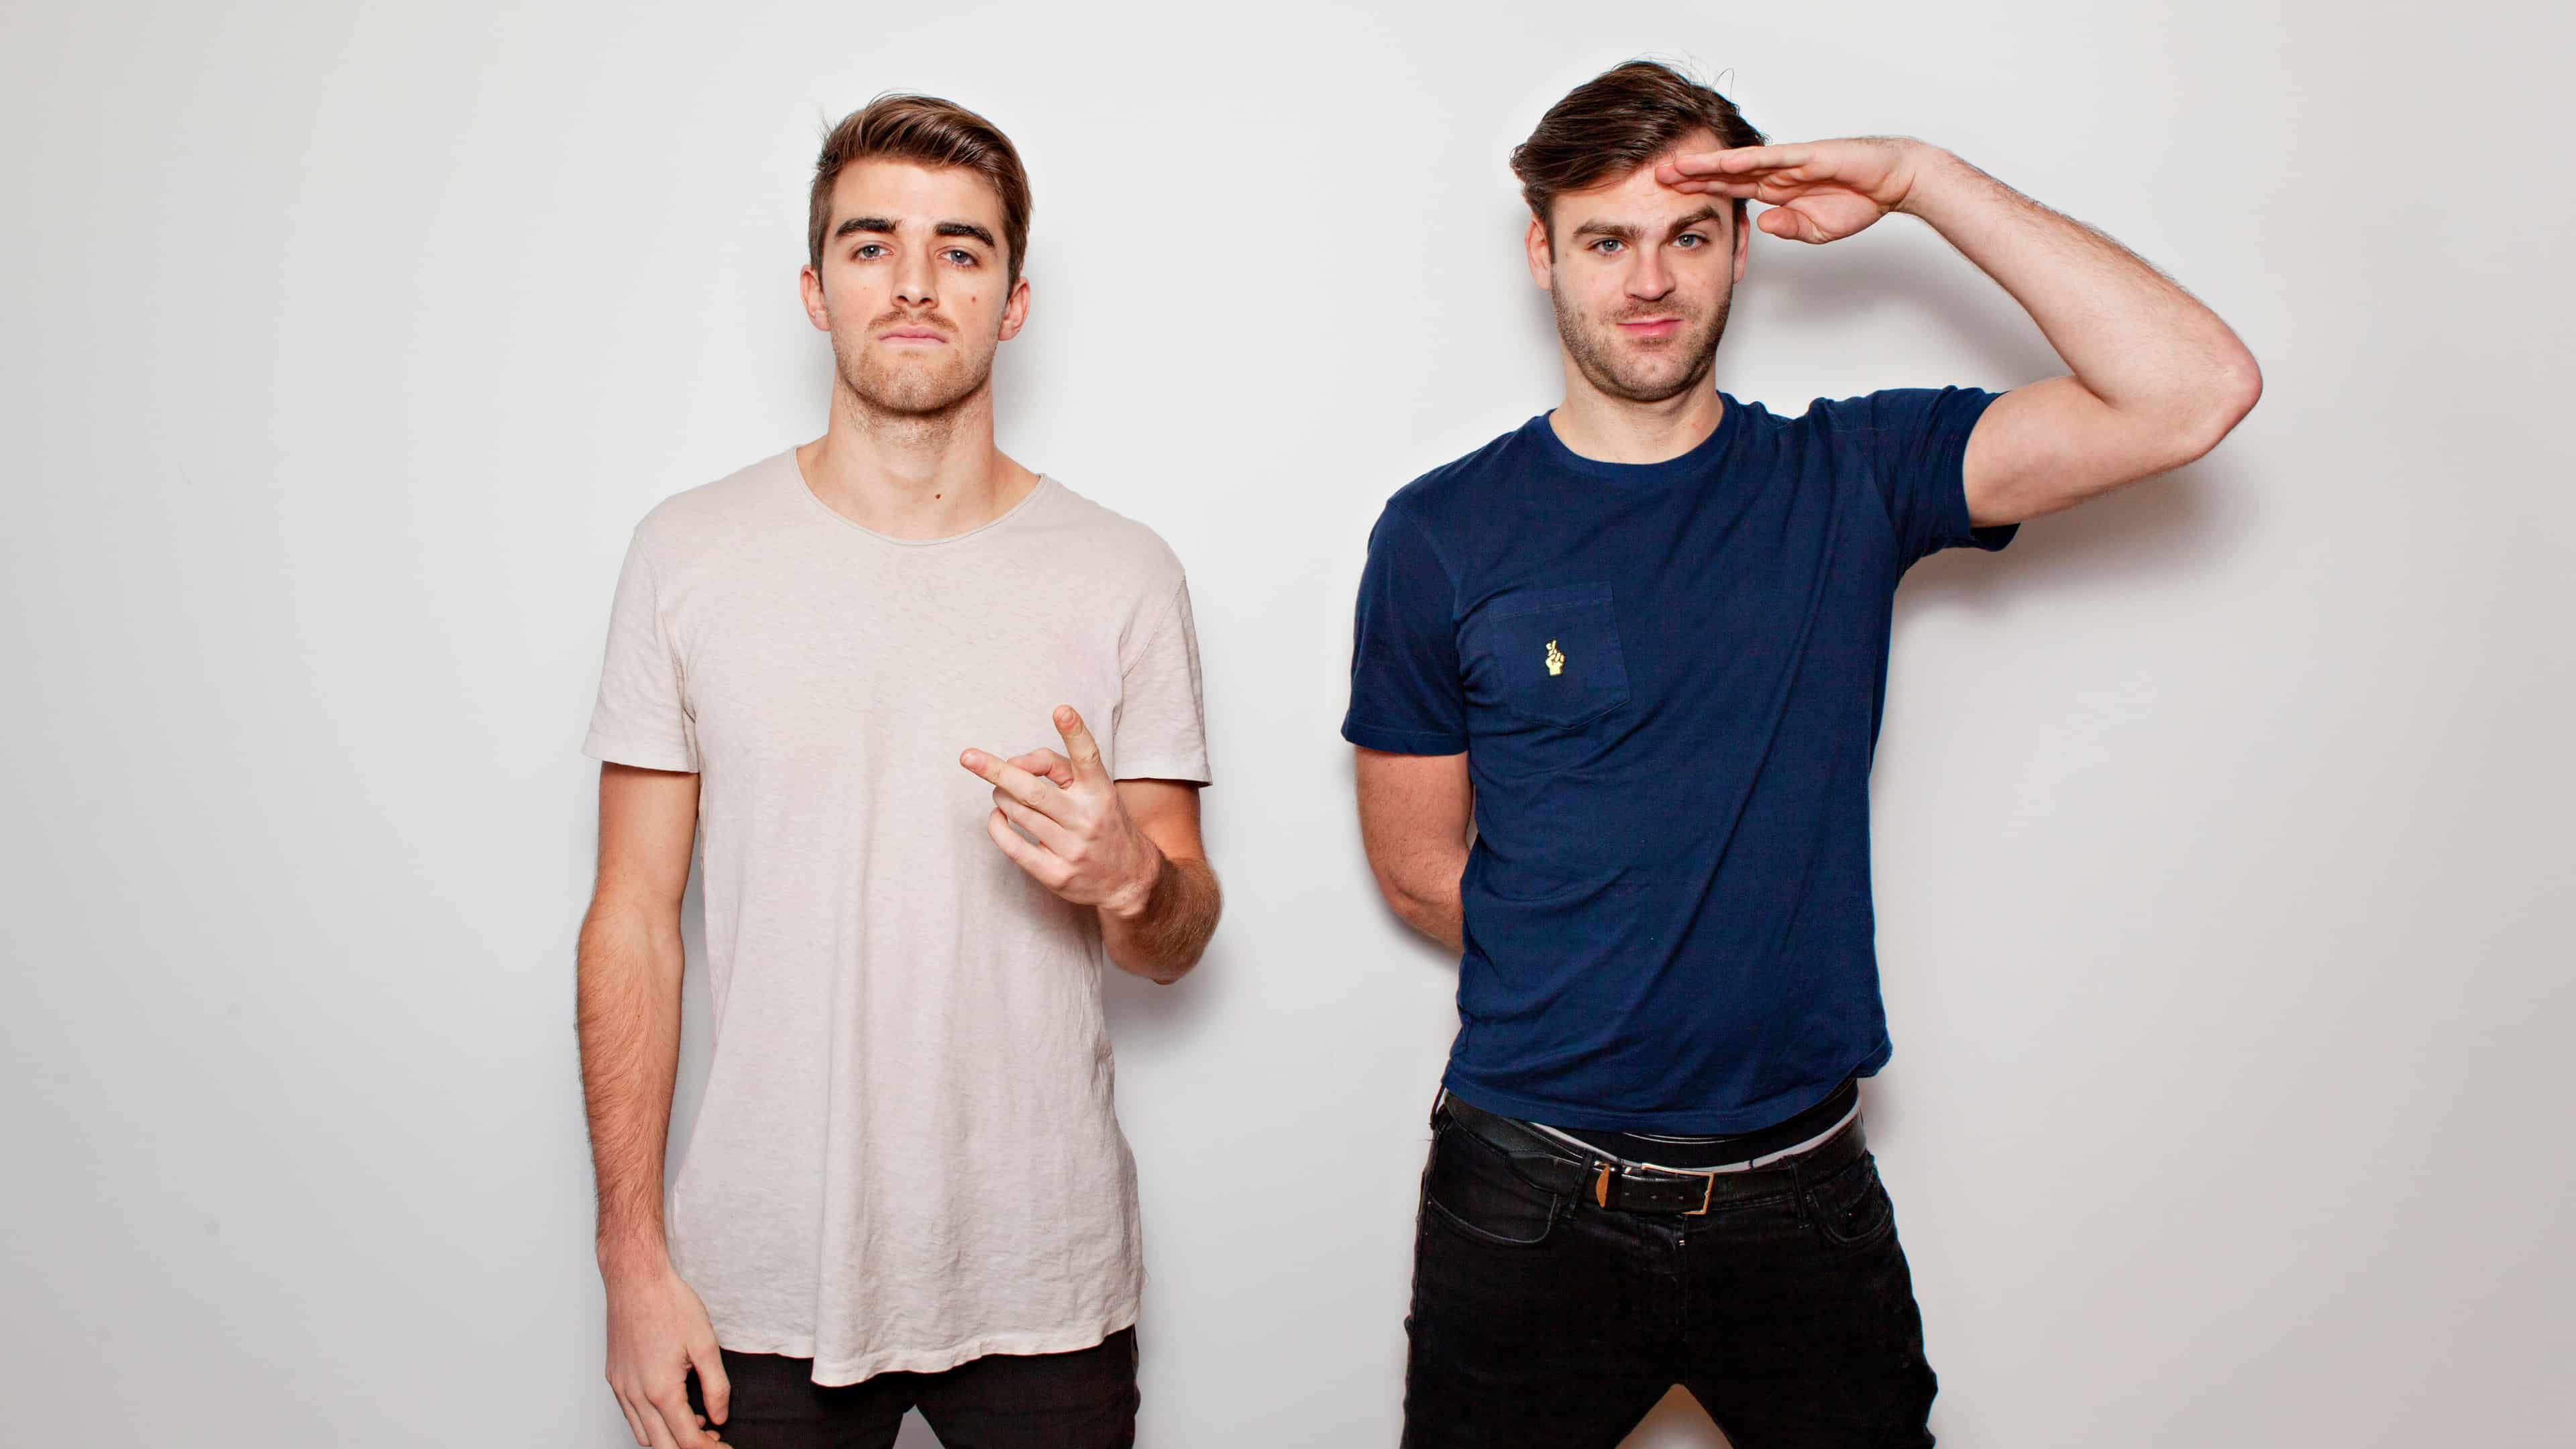 The Chainsmokers HD Wallpapers 45352 - Baltana